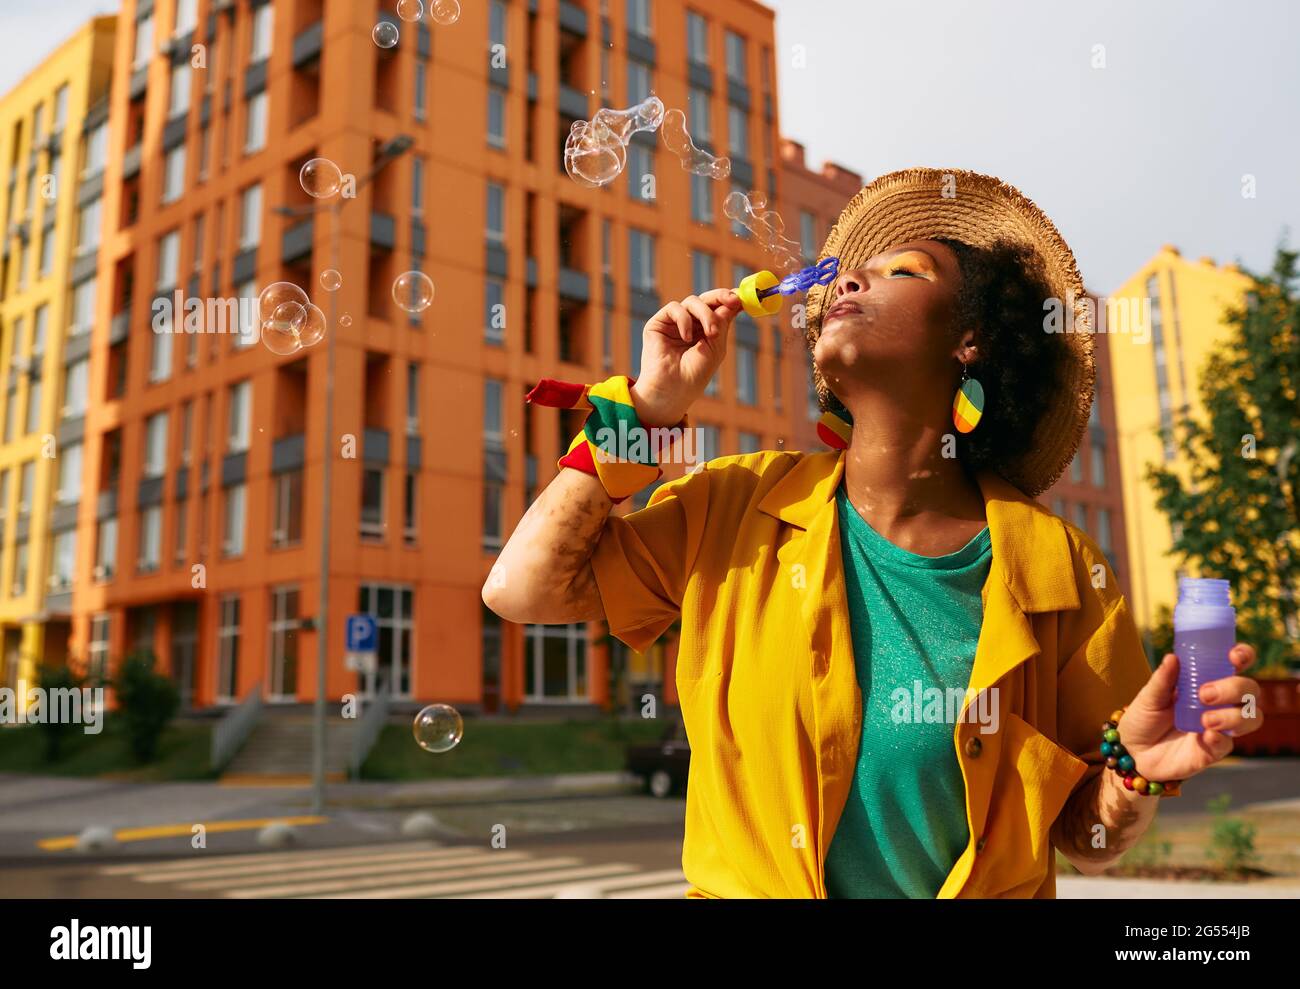 Stylish multi-ethnic woman blowing bubbles walking around modern city with colored buildings. Summer life in city Stock Photo